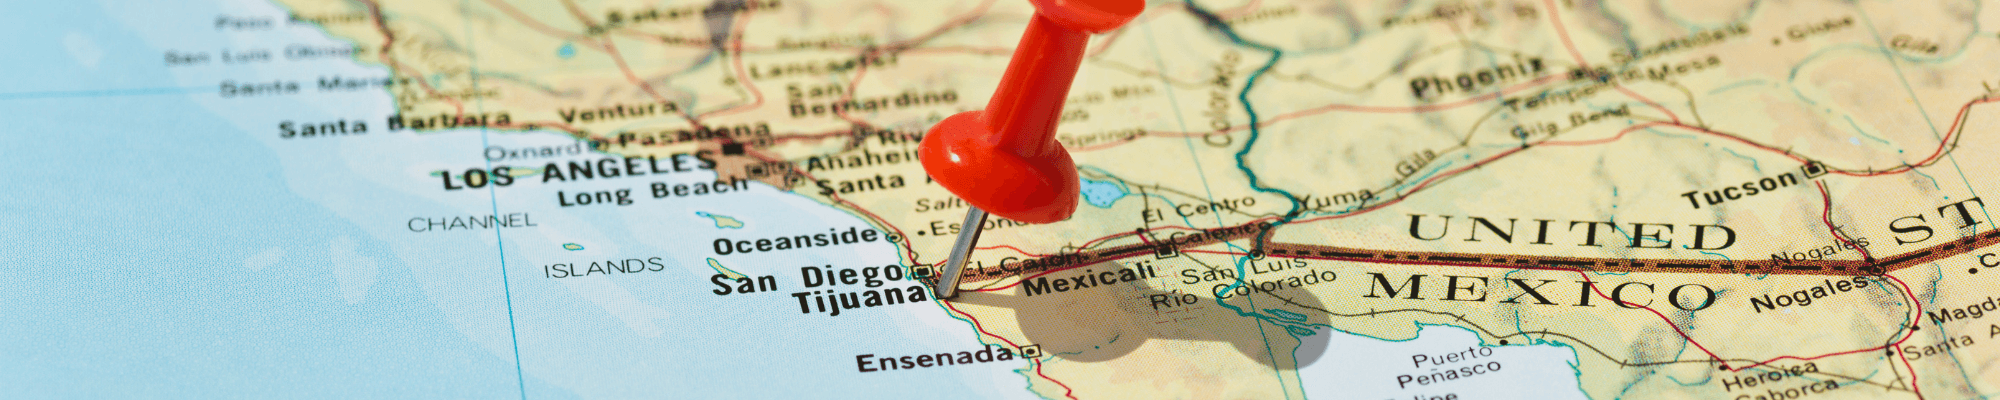 map up close view of San Diego-Mexico